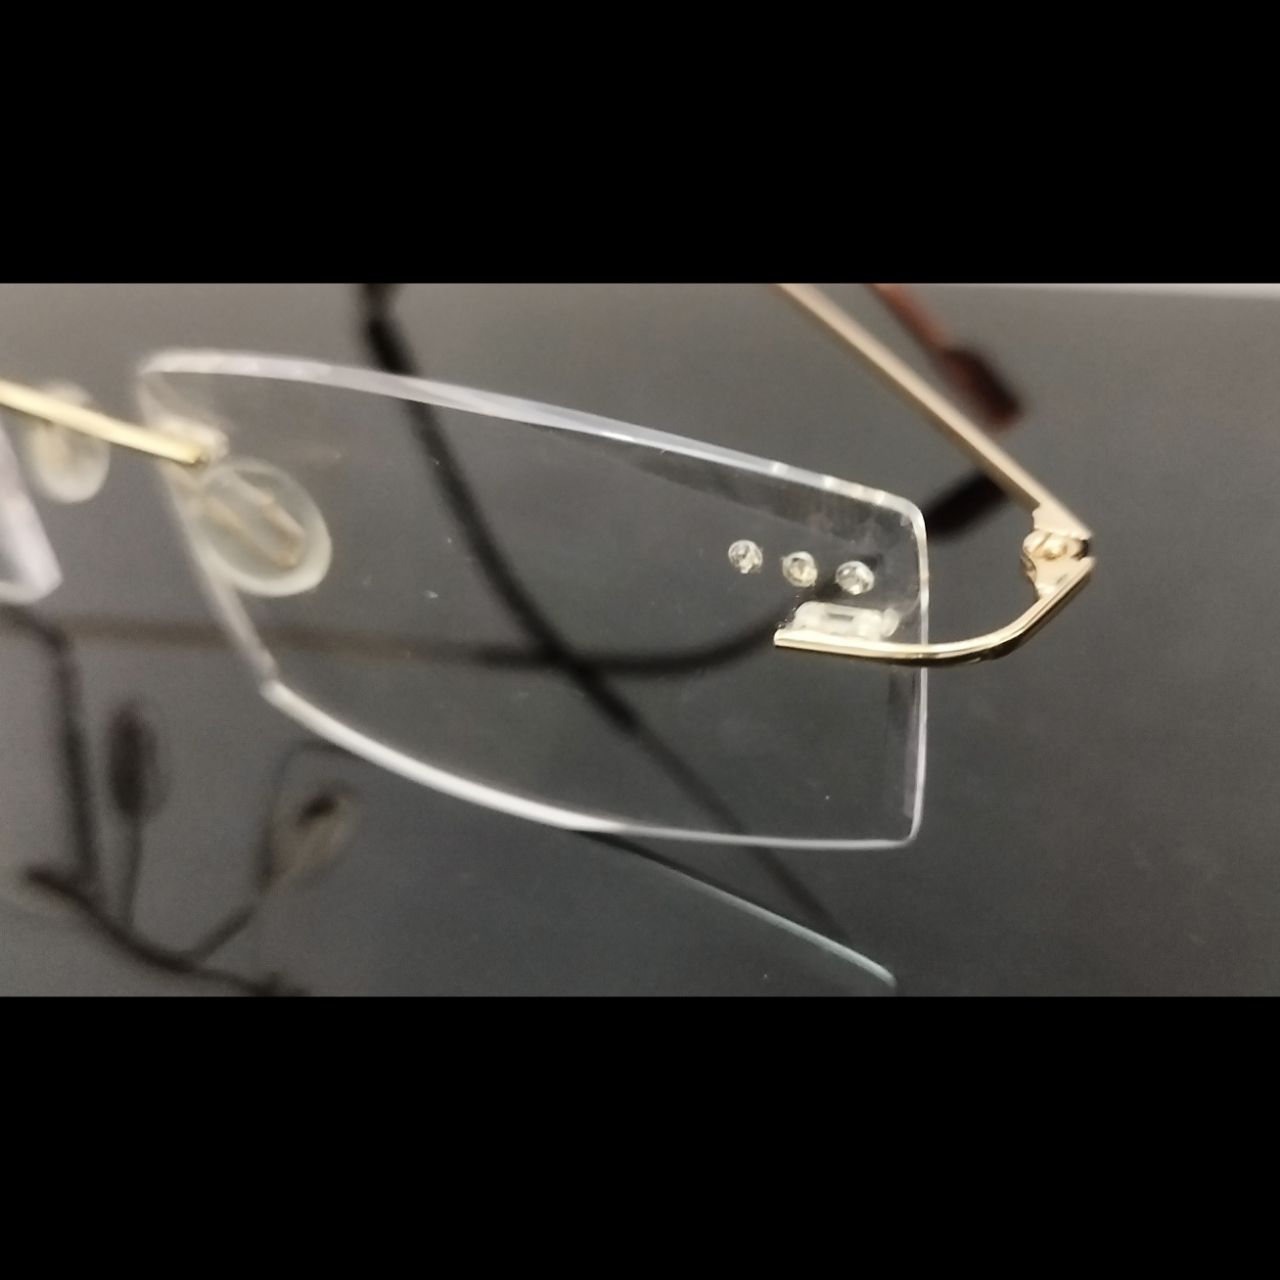 Gold Rimless Executive Glasses with Laser Cut Edges and Left Lens Design